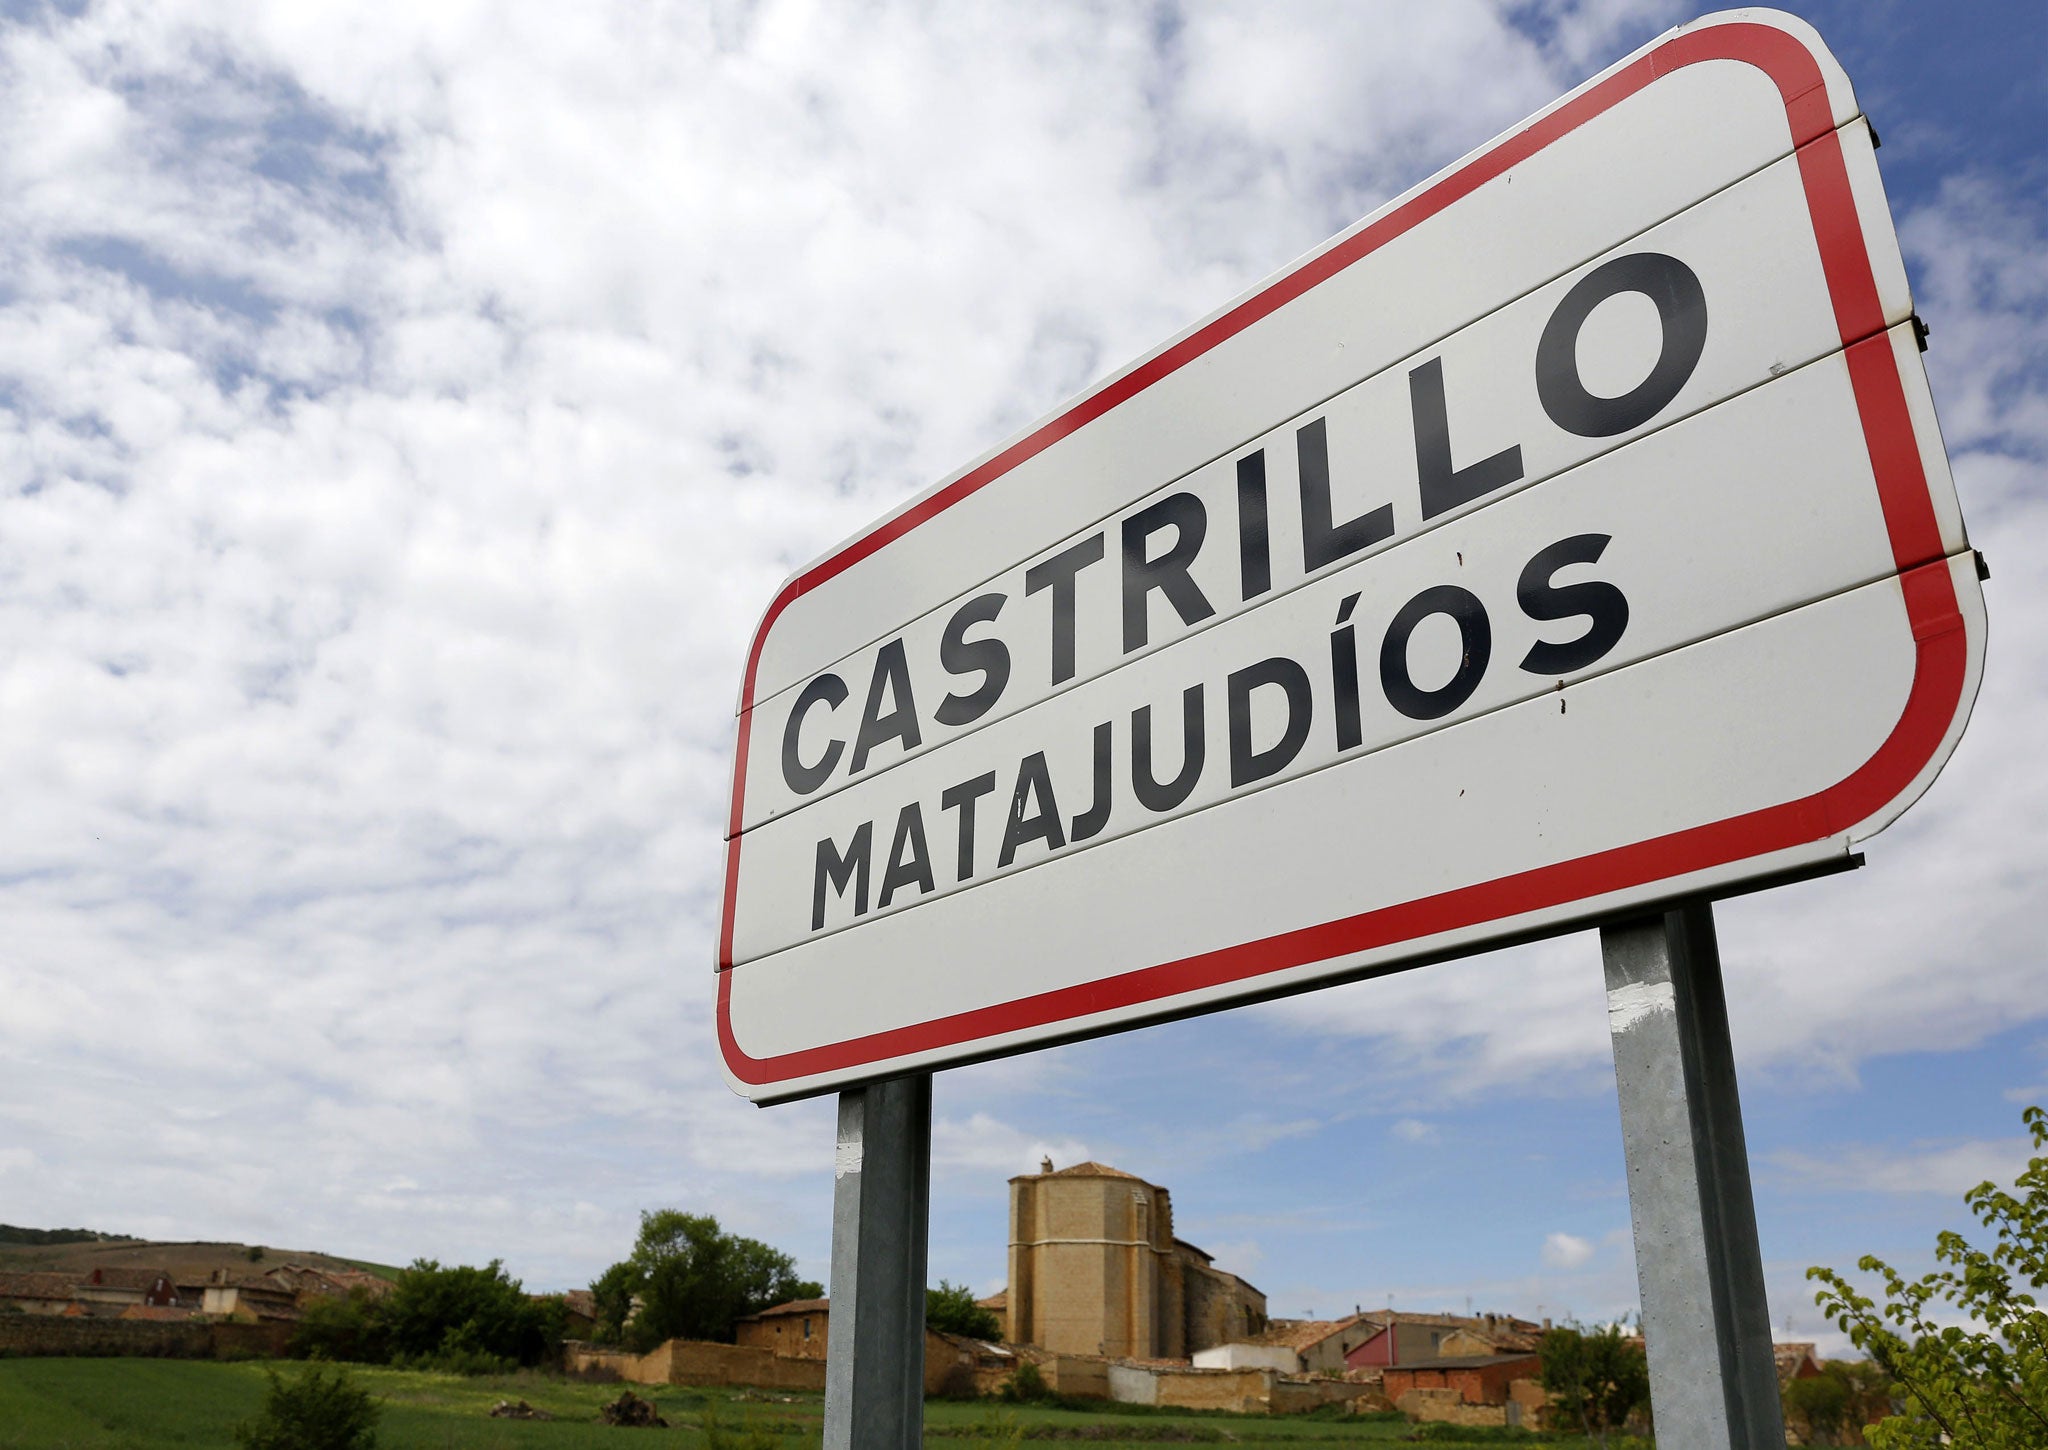 Castrillo Matajudios - a Spanish town which, in English, translates as Castrillo Kill Jews - will vote on May 25 whether to change its name. Meanwhile it appears that recognition of Spain's historic purging of Muslims is being overlooked